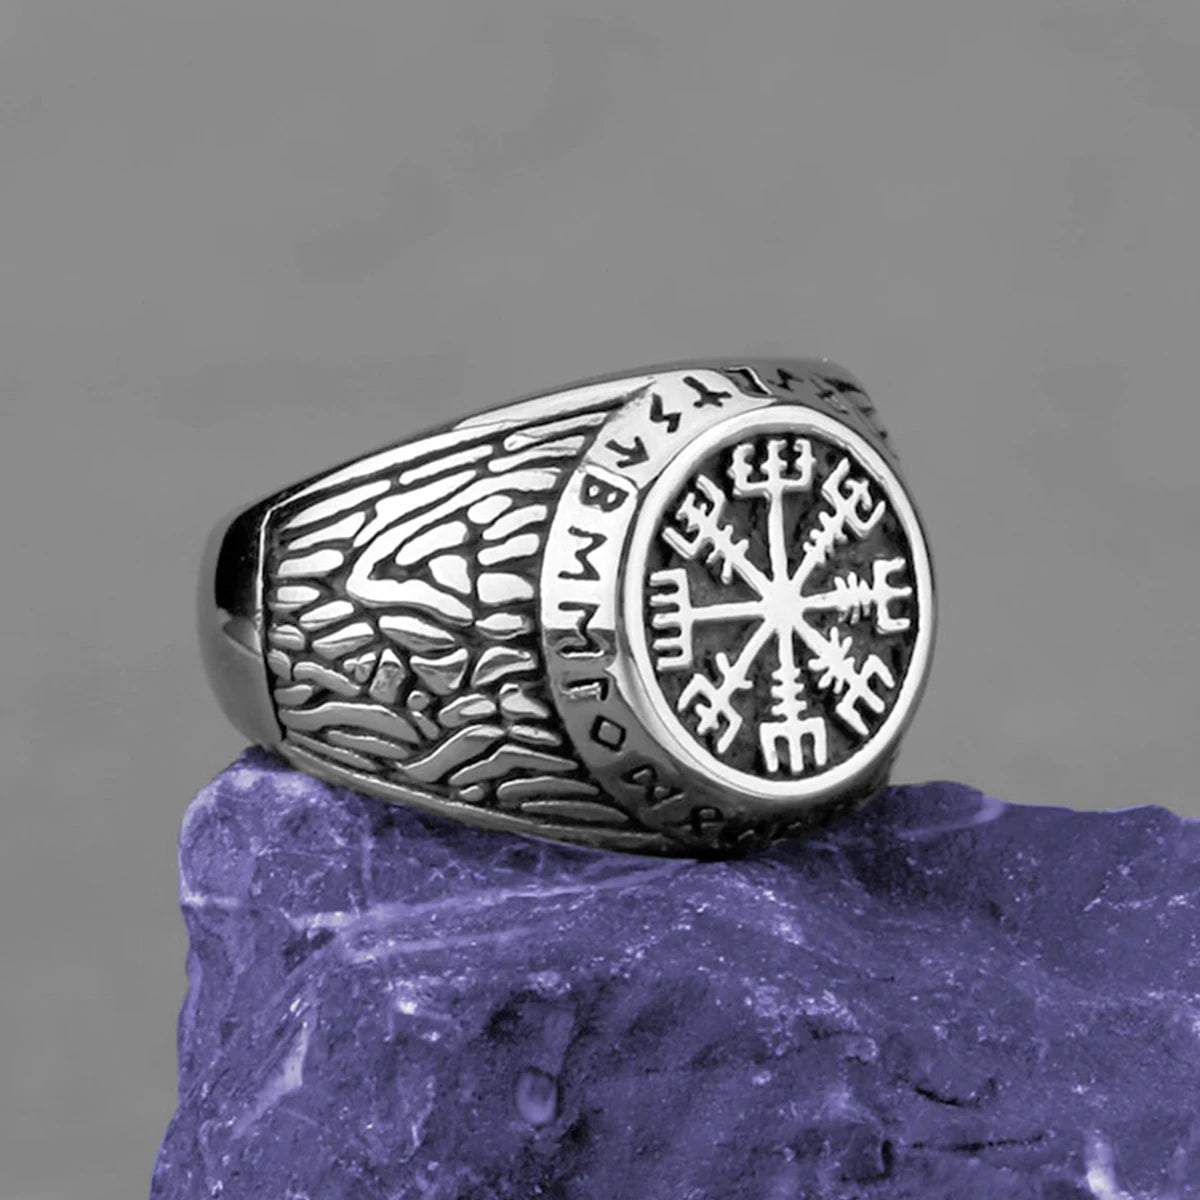 Nordic Viking Stainless Steel Ring - Anchor Compass Tree of Life Rune Amulet Wolf Finger Jewelry VK-10 Men's Rings